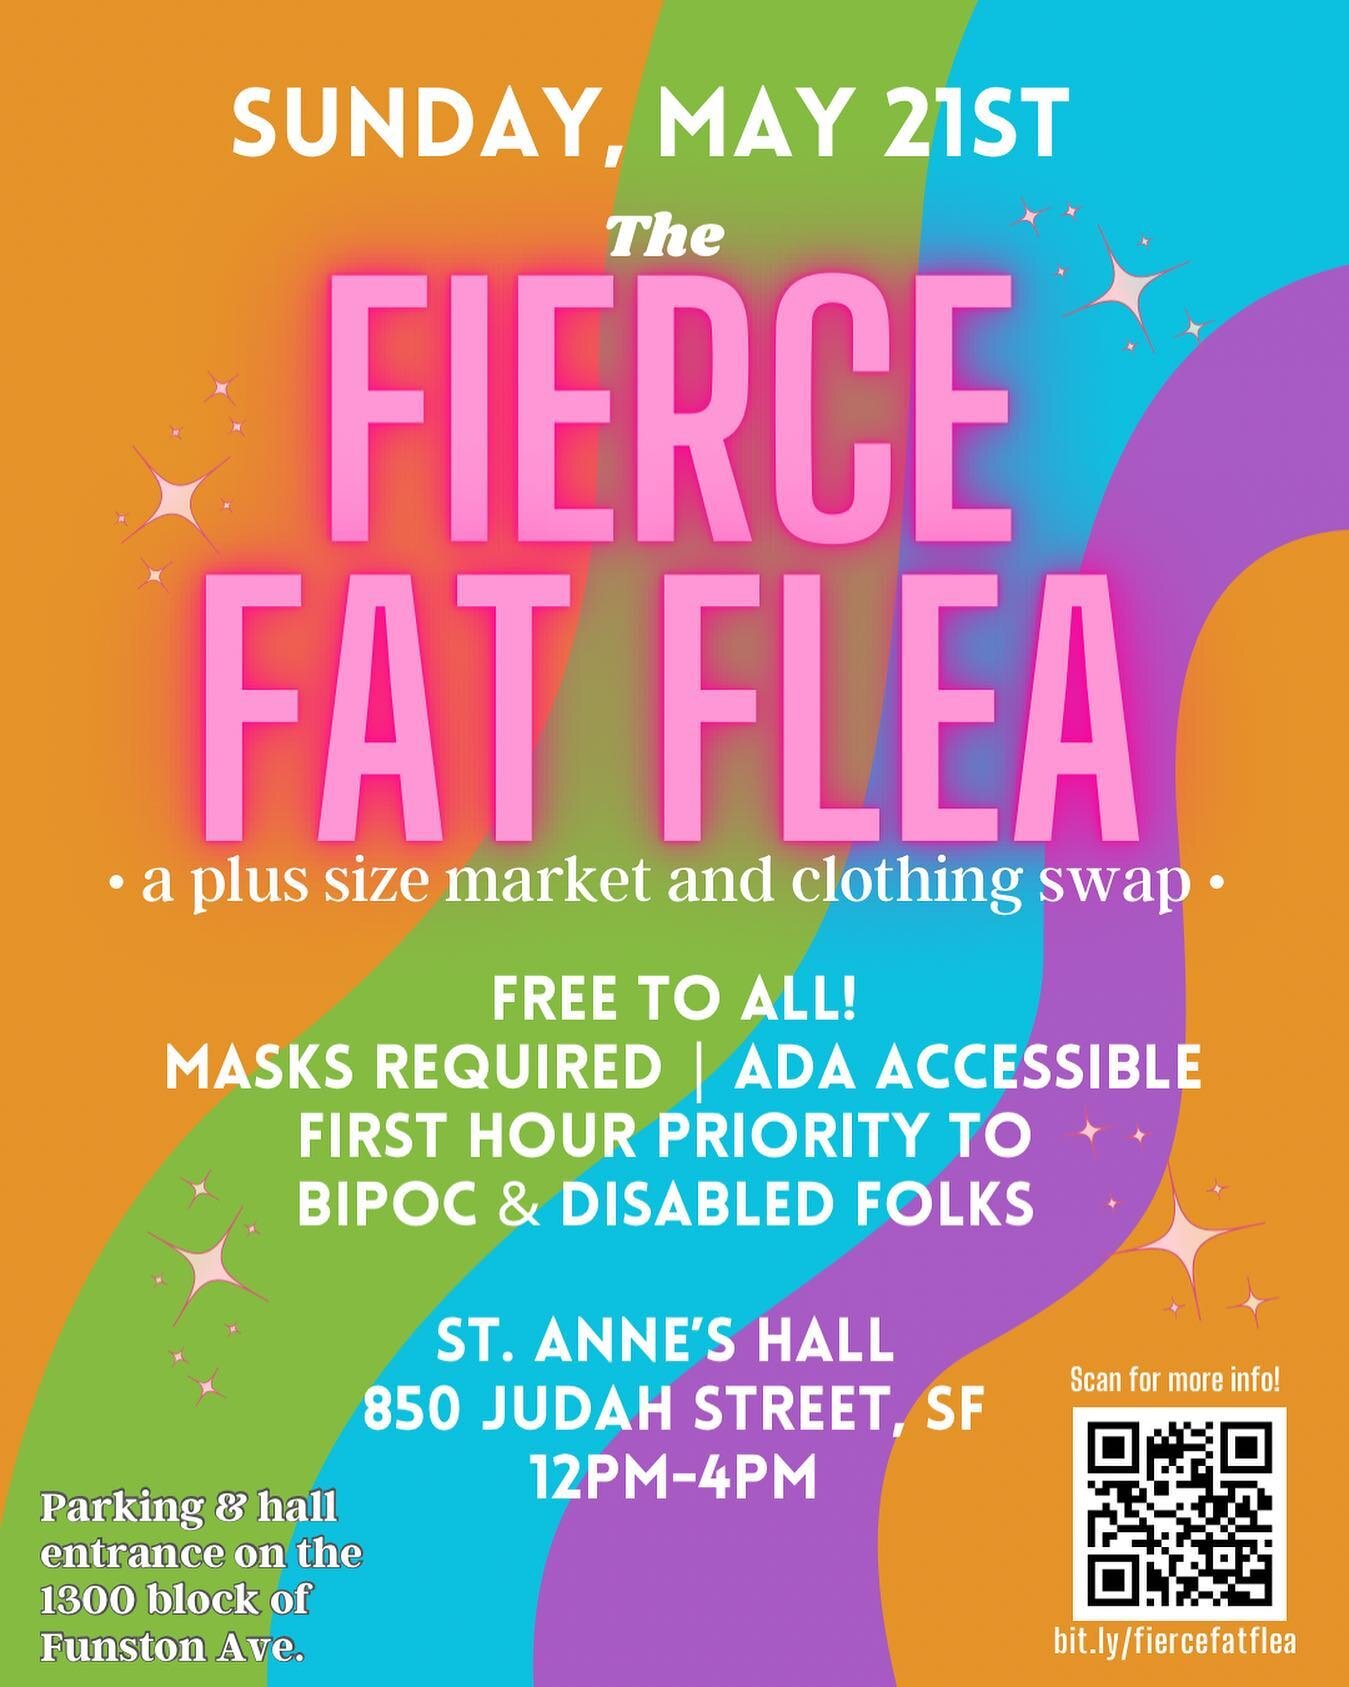 TWO DAYS AWAY!

Come to the first ever @fiercefatfleamarket in San Francisco, this Sunday, May 21st. You can shop the swap or shop from any of our 27 vendors! The entrance to the event is on the 1300th block of Funston between Irving and Judah. There